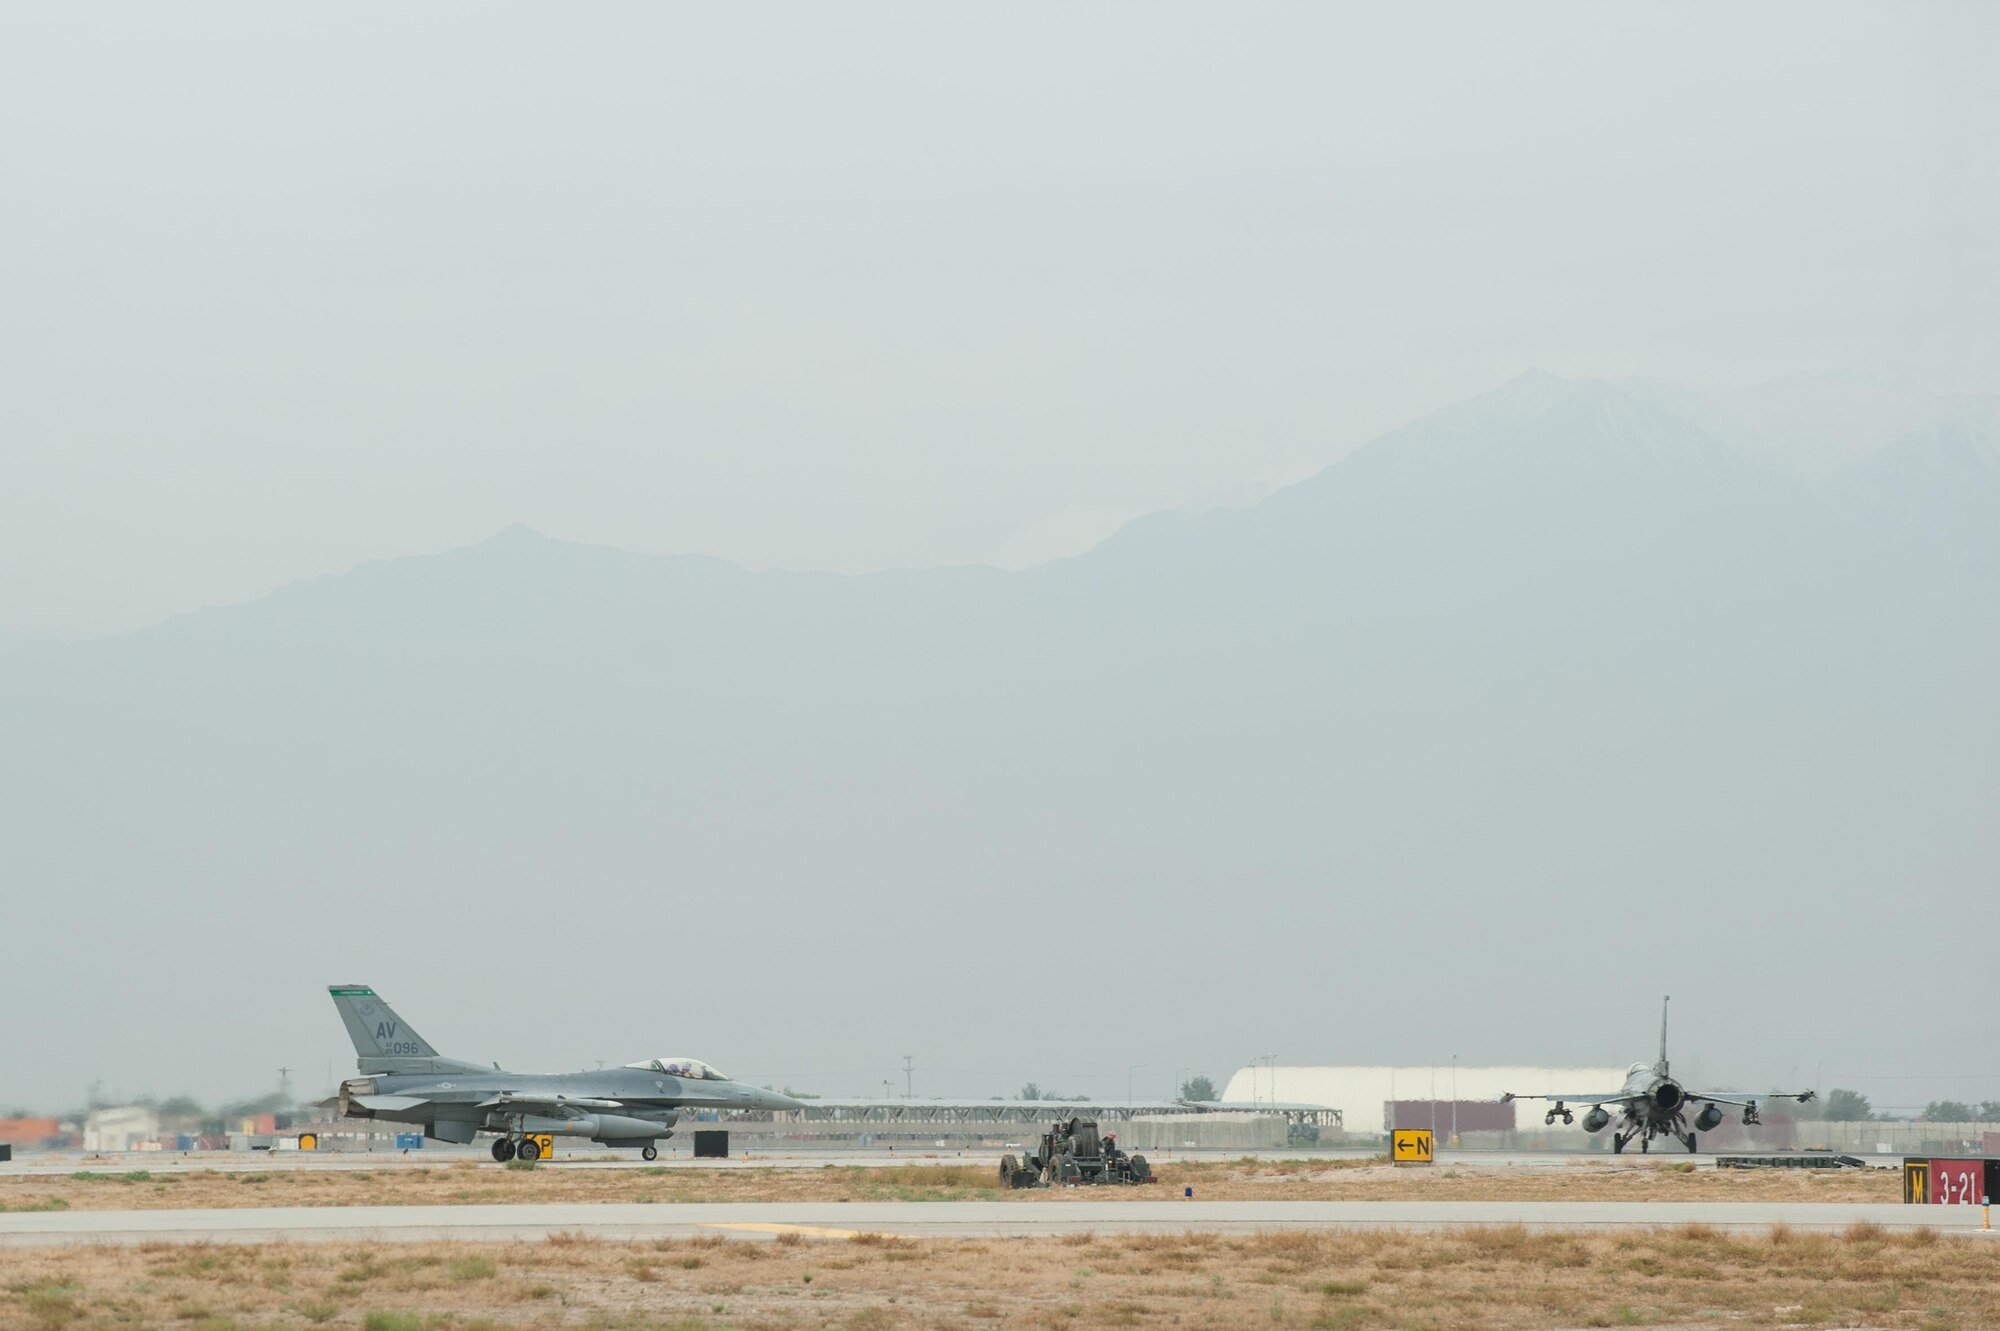 U.S. Air Force F-16 Fighting Falcon aircraft assigned to the 555th Expeditionary Fighter Squadron taxi before taking off on a combat sortie from Bagram Airfield, Afghanistan, Sept. 22, 2015. The F-16 is a multi-role fighter aircraft that is highly maneuverable and has proven itself in air-to-air and air-to-ground combat. (U.S. Air Force photo by Tech. Sgt. Joseph Swafford/Released)